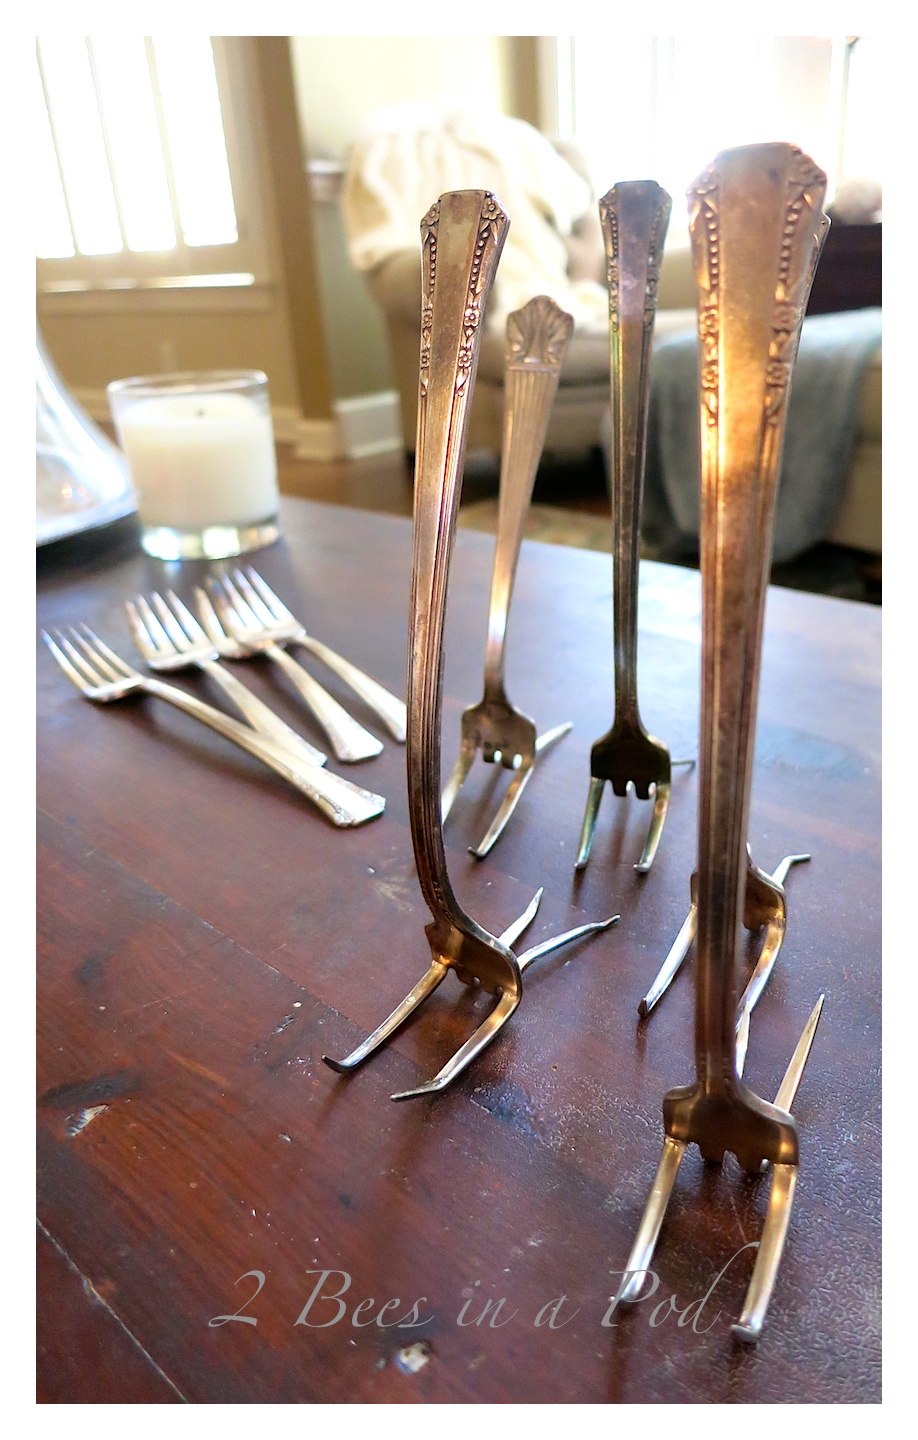 DIY Place card holder using vintage silverware. Easy project that took just minutes to create.